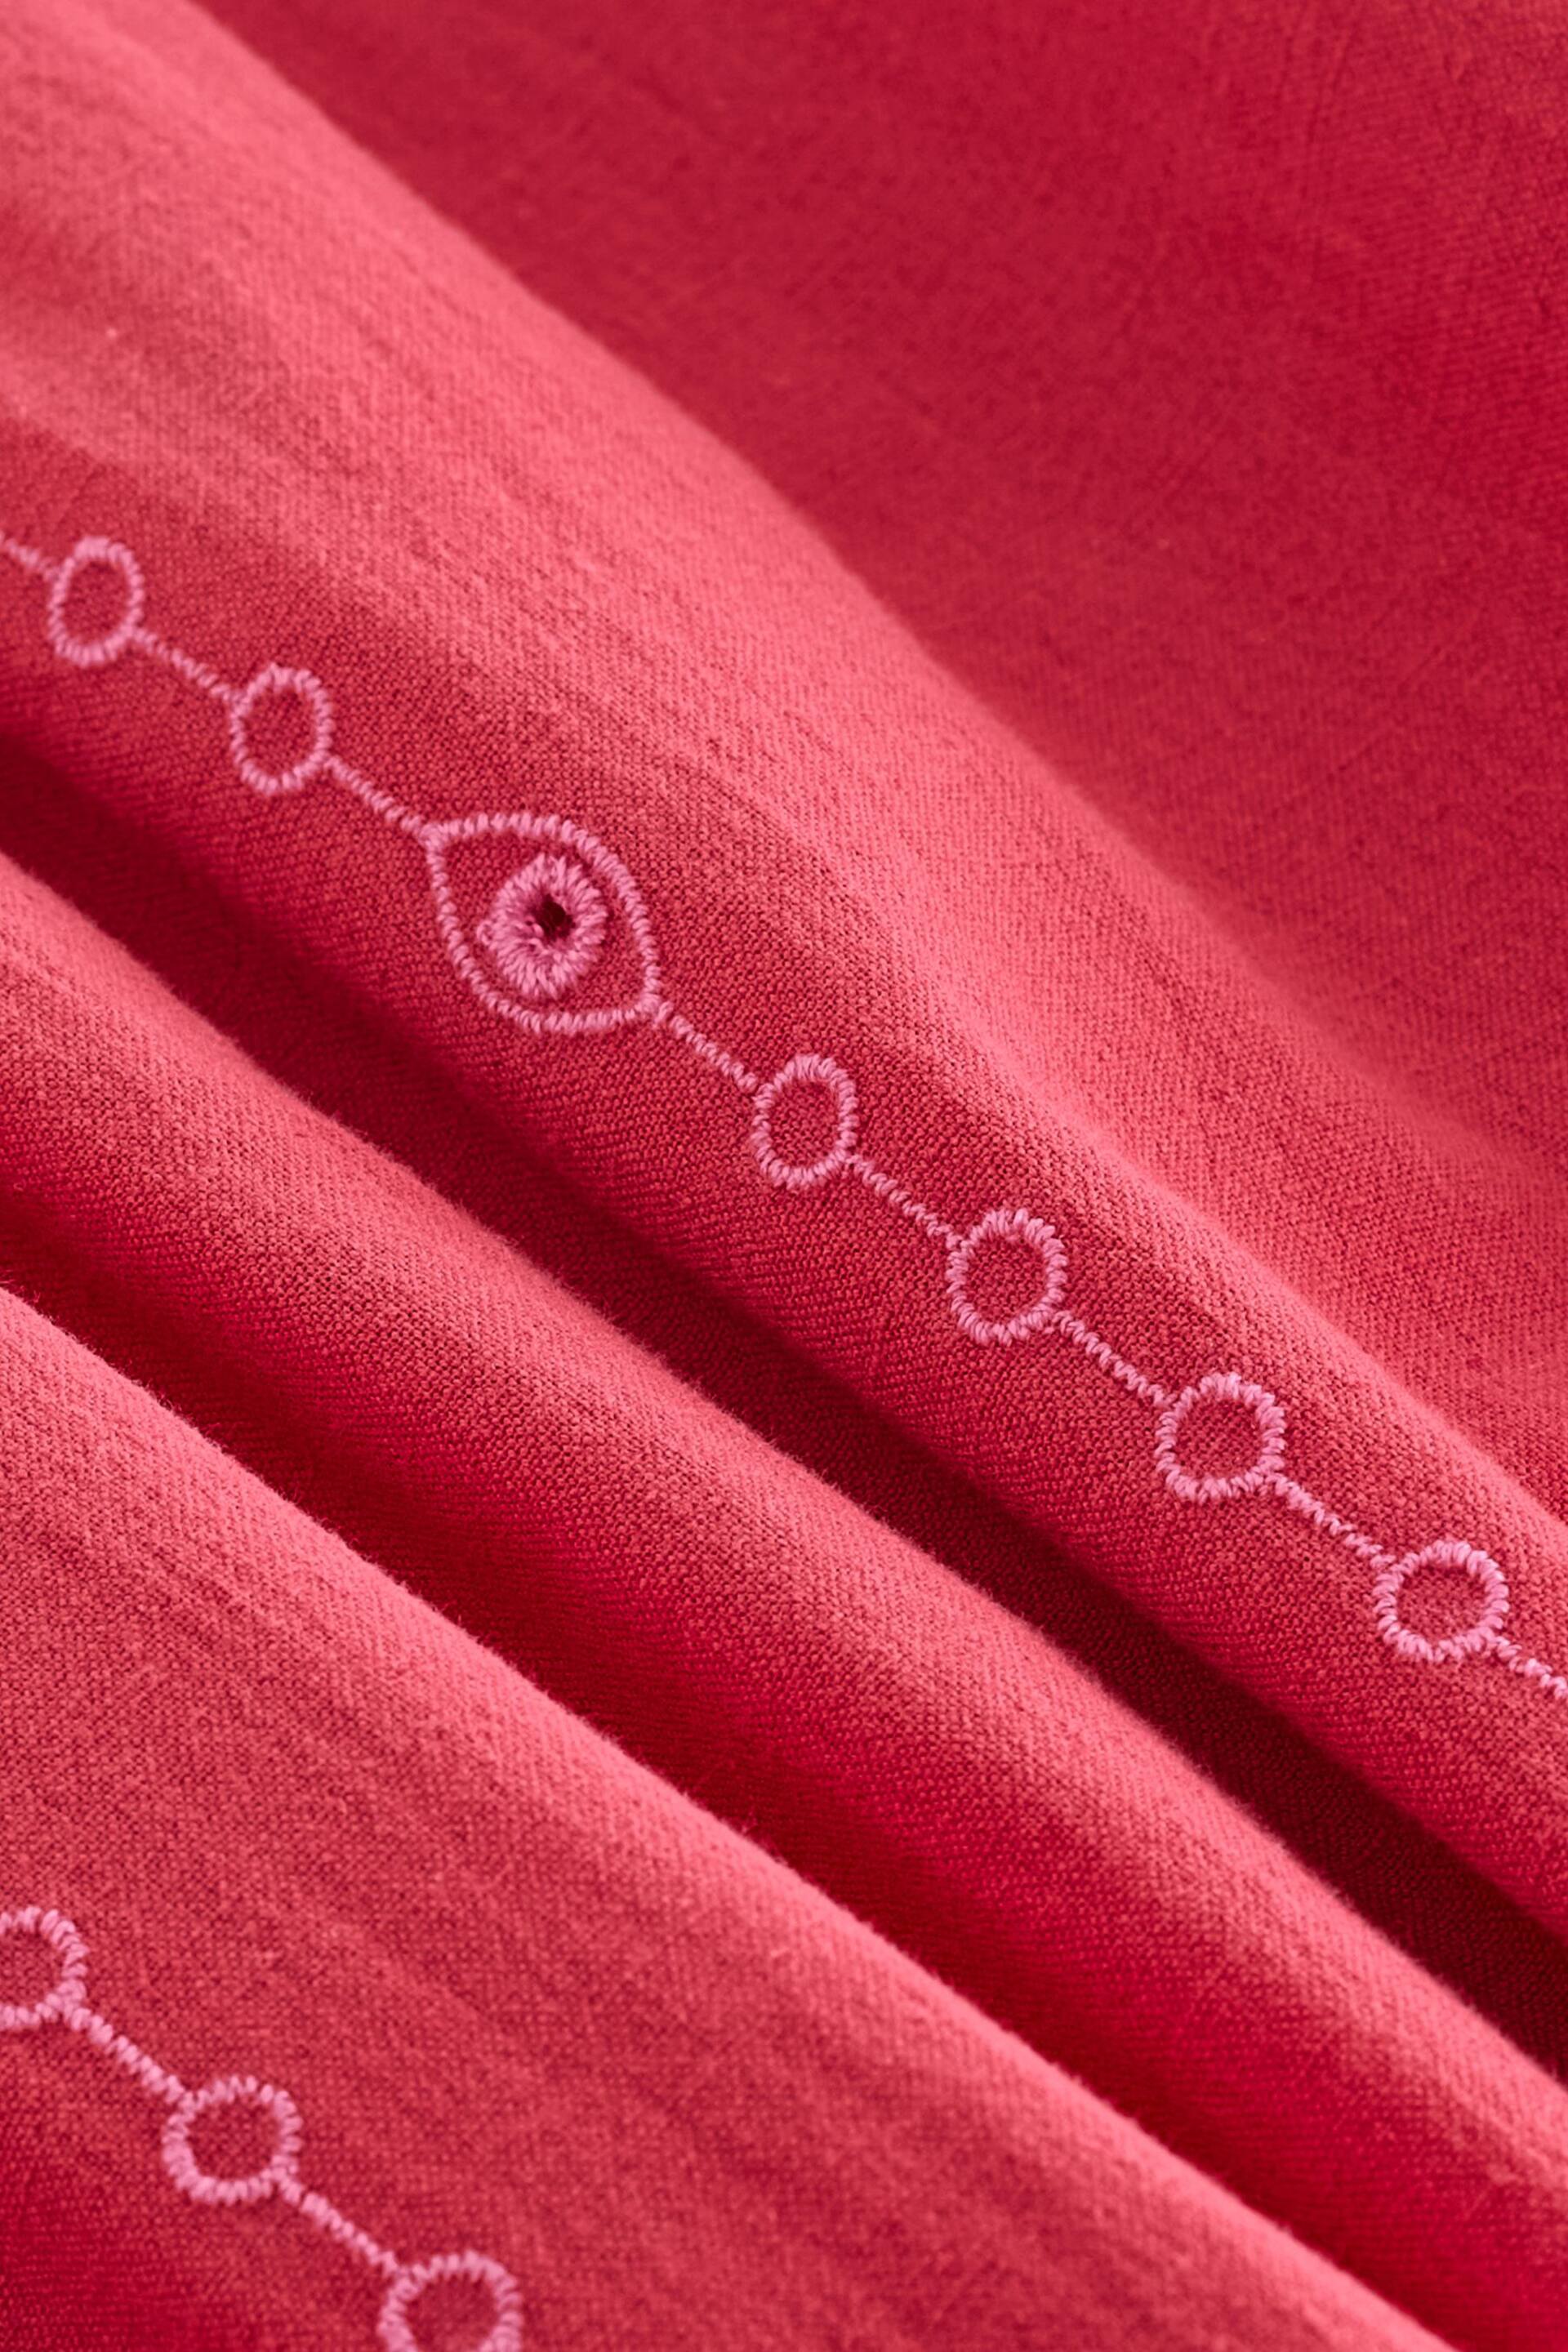 Red/Pink Embroidered Summer Midi Skirt - Image 6 of 6